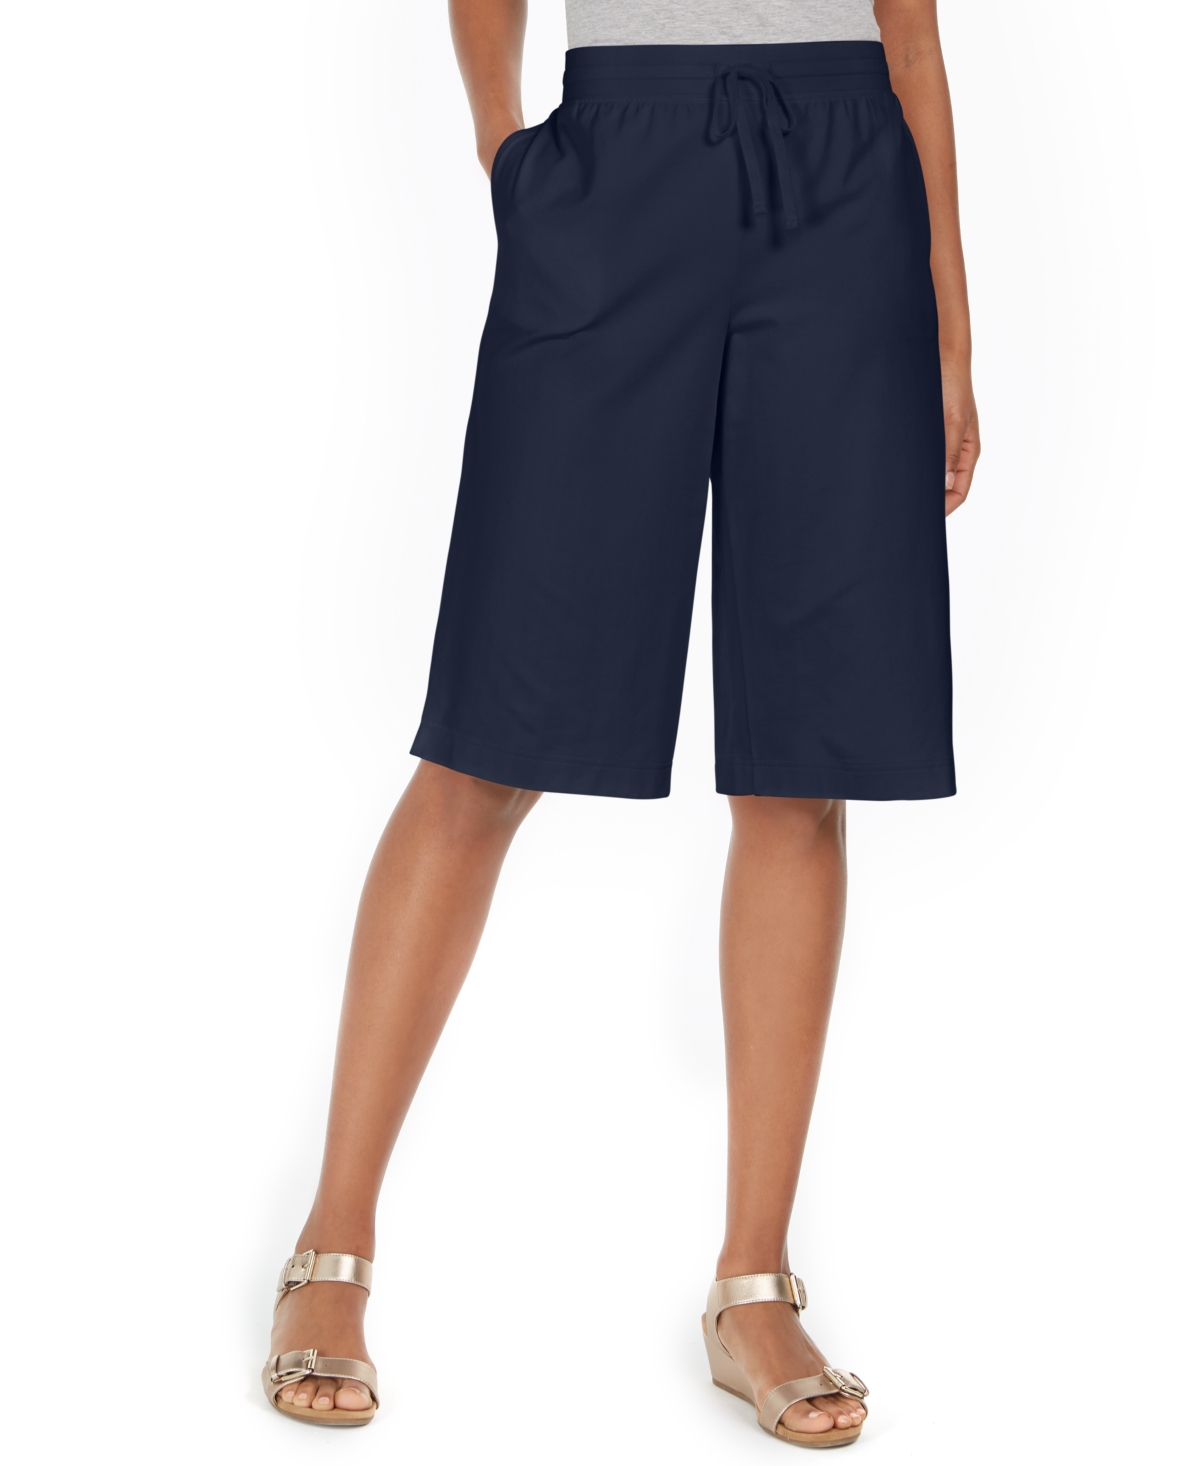 Petite Knit Skimmer Shorts, Created for Macy's - Intrepid Blue